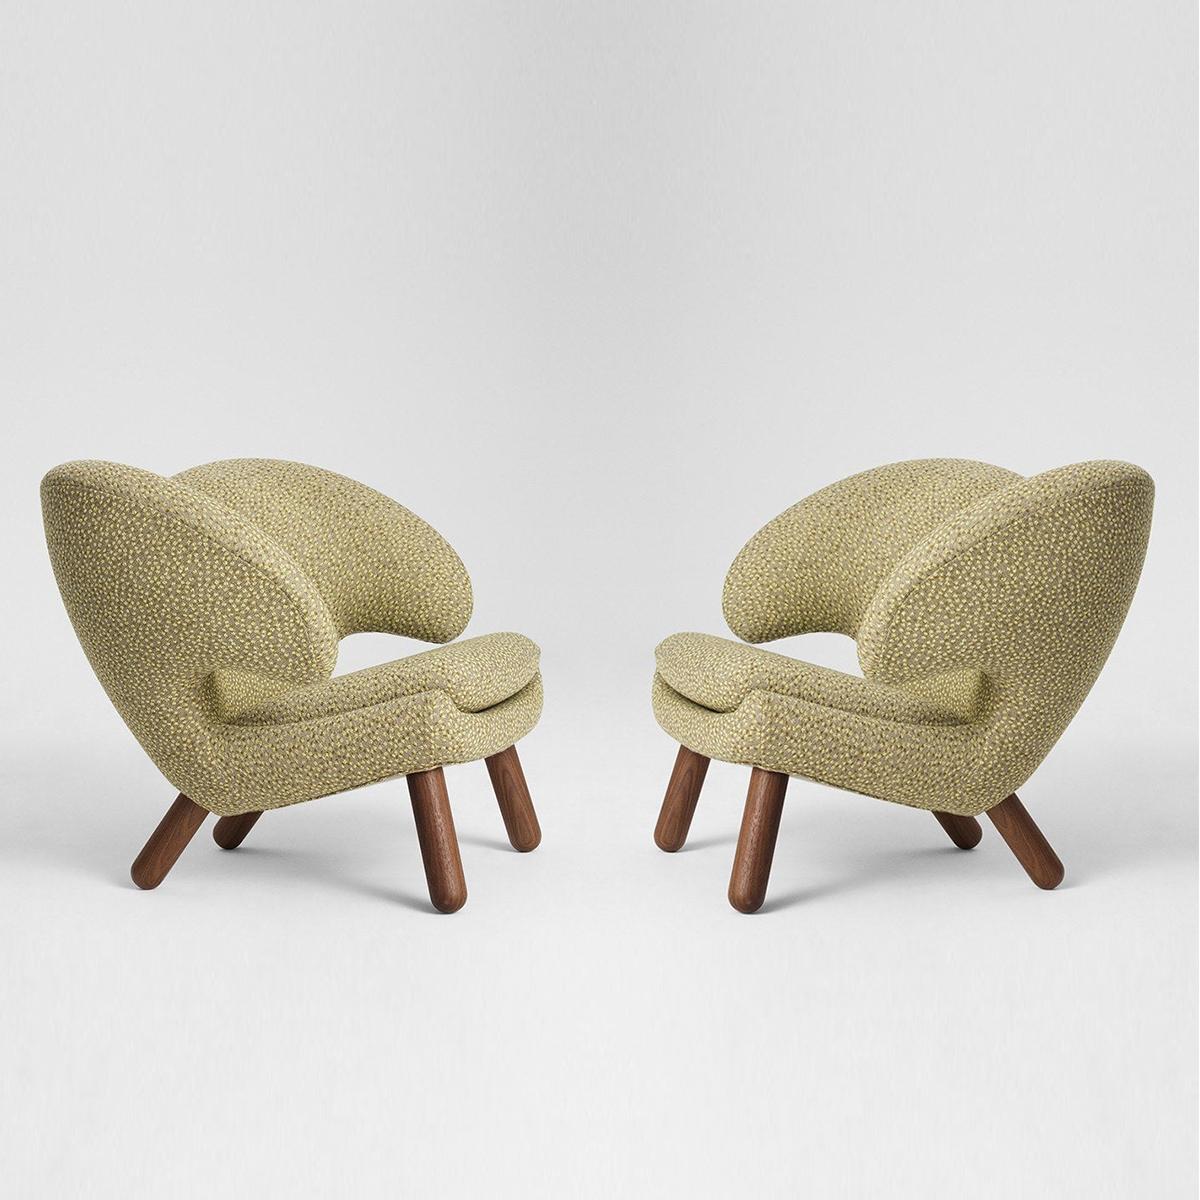 Fabric Set of Two Pelican Chairs in Leather and Wood by Finn Juhl